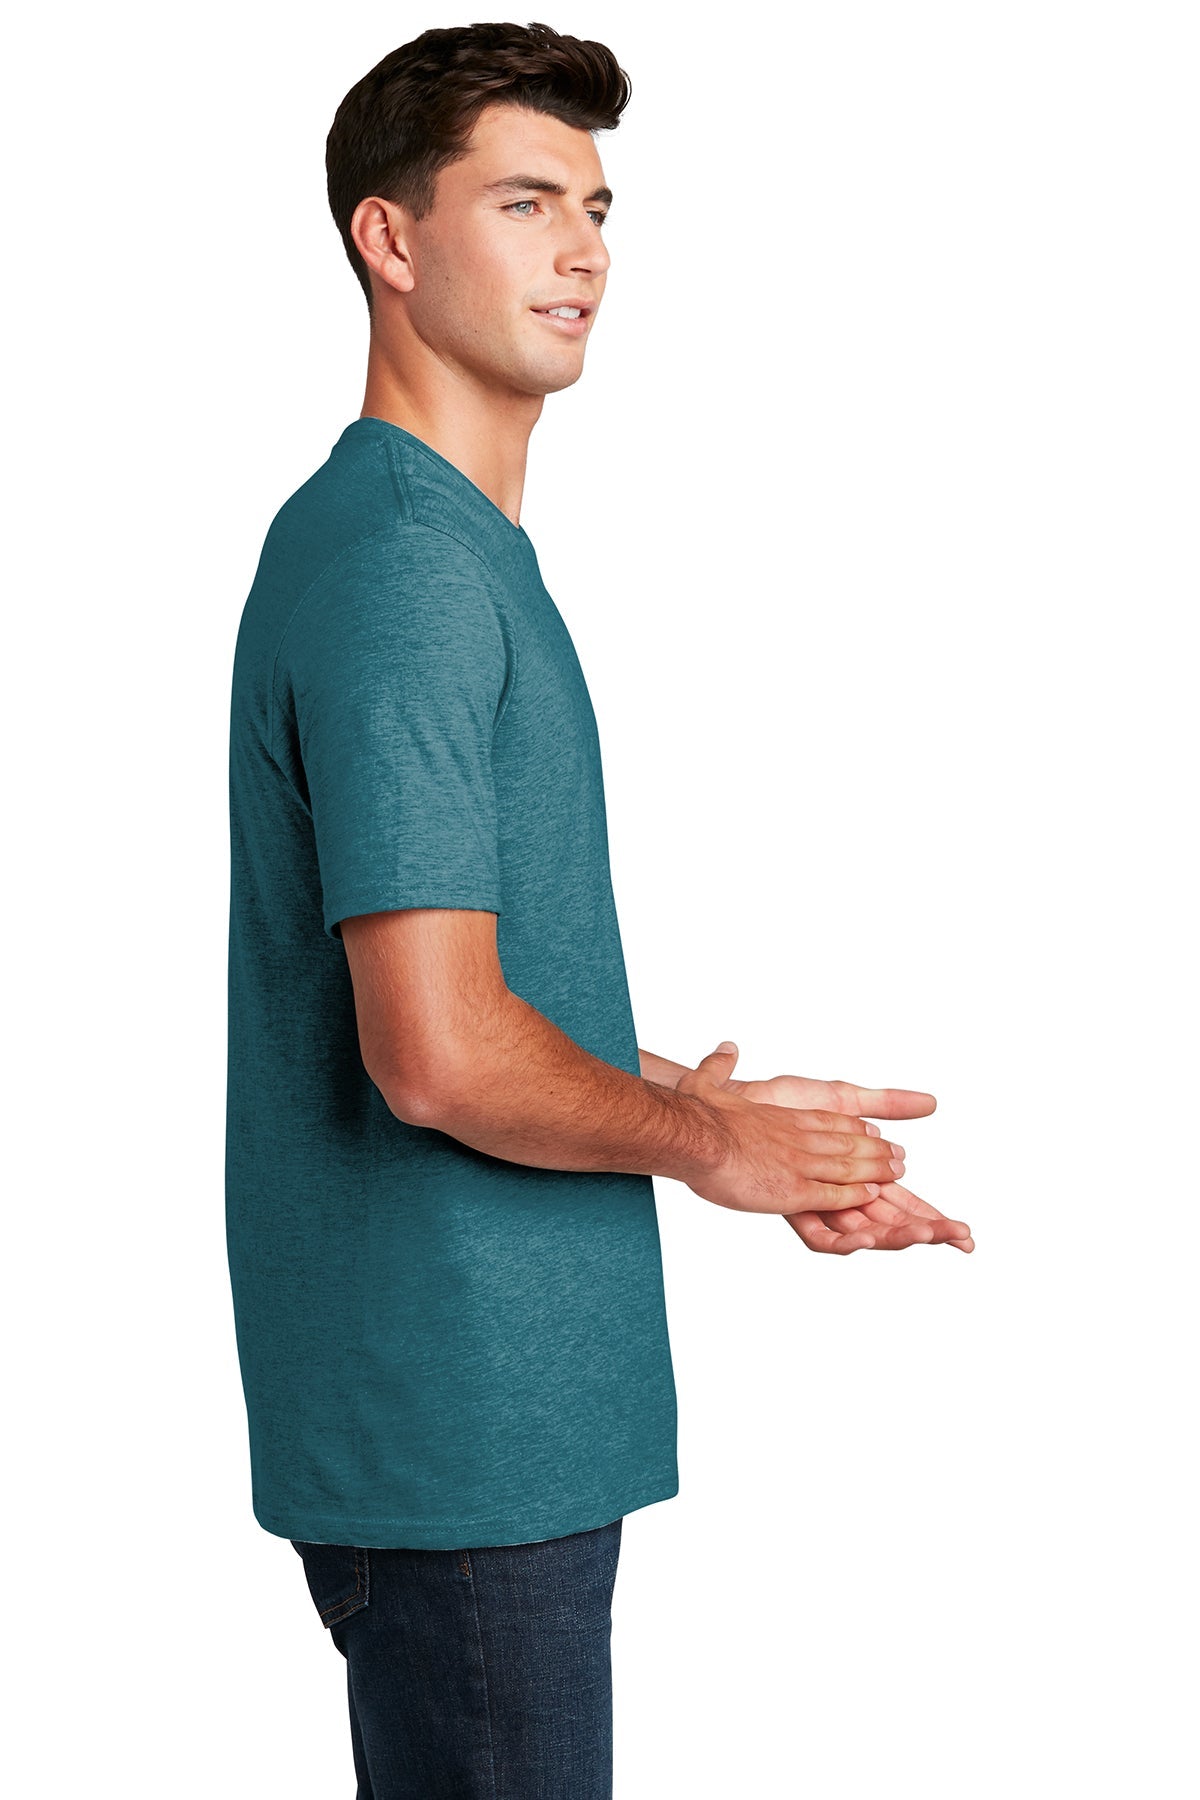 District Made Mens Perfect Blend Tee's, Heathered Teal